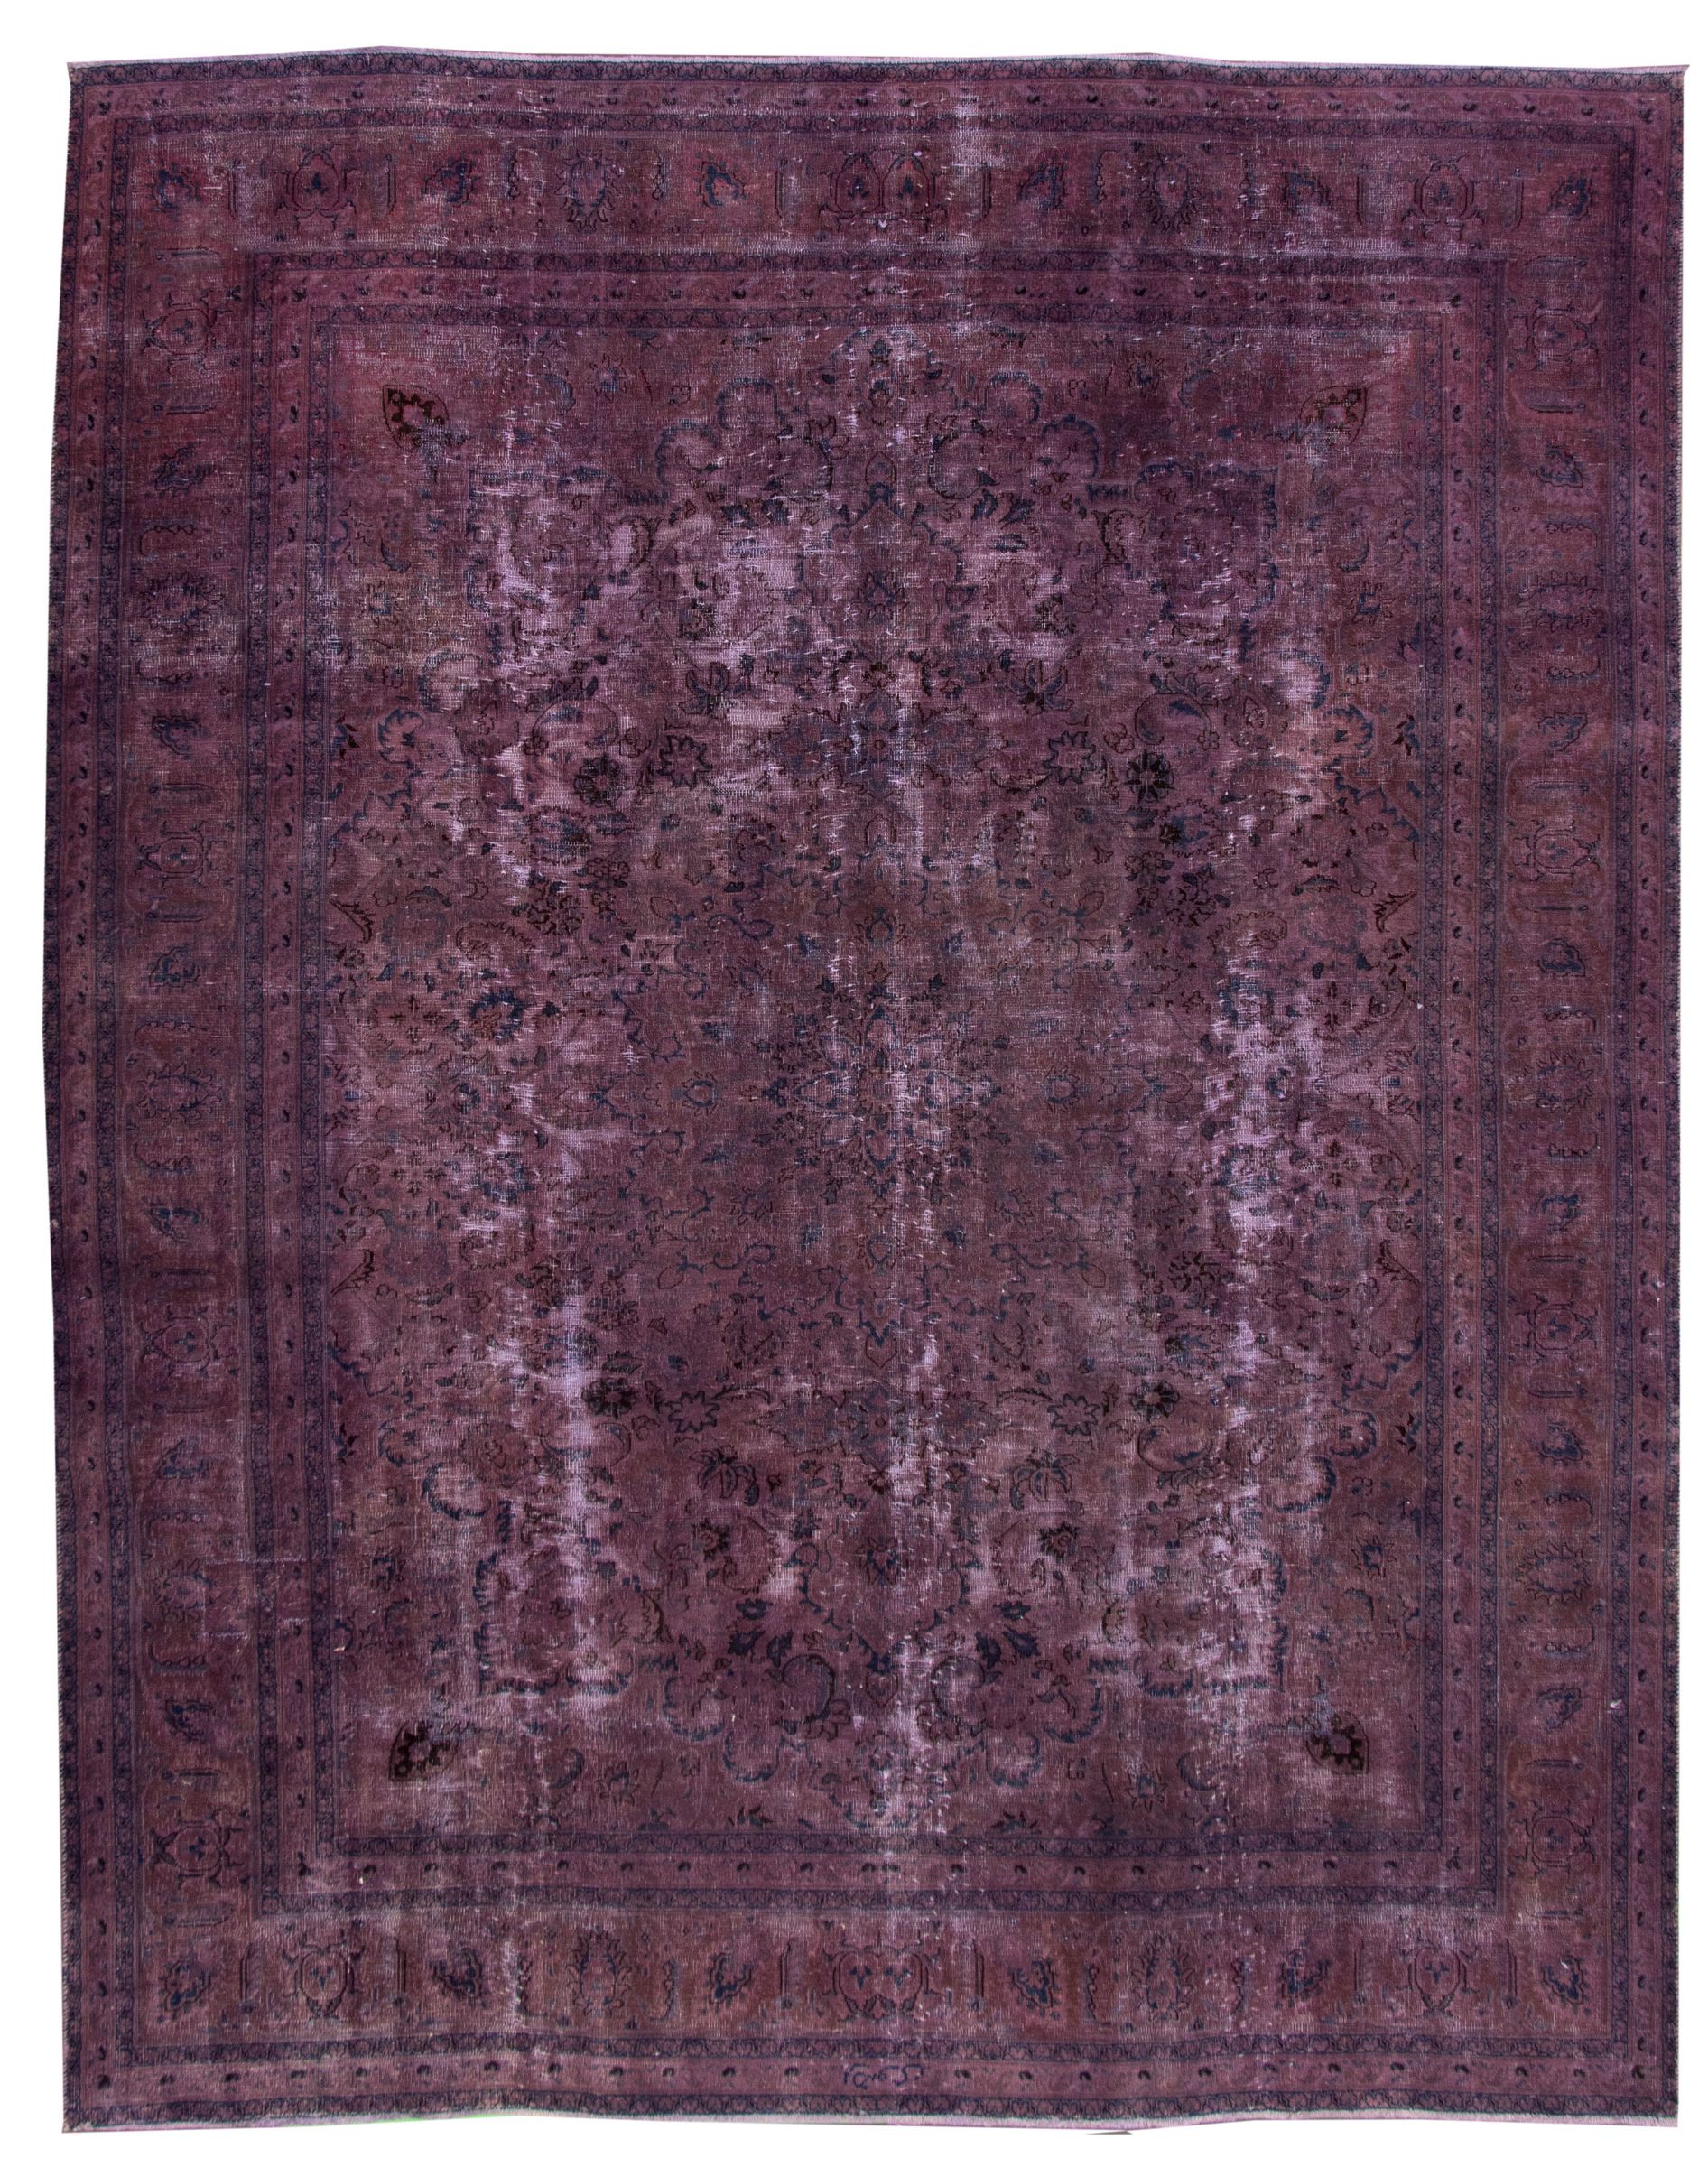 Hand-knotted Color Transition Purple Wool Rug 9'5" x 12'4" Size: 9'5" x 12'4"  